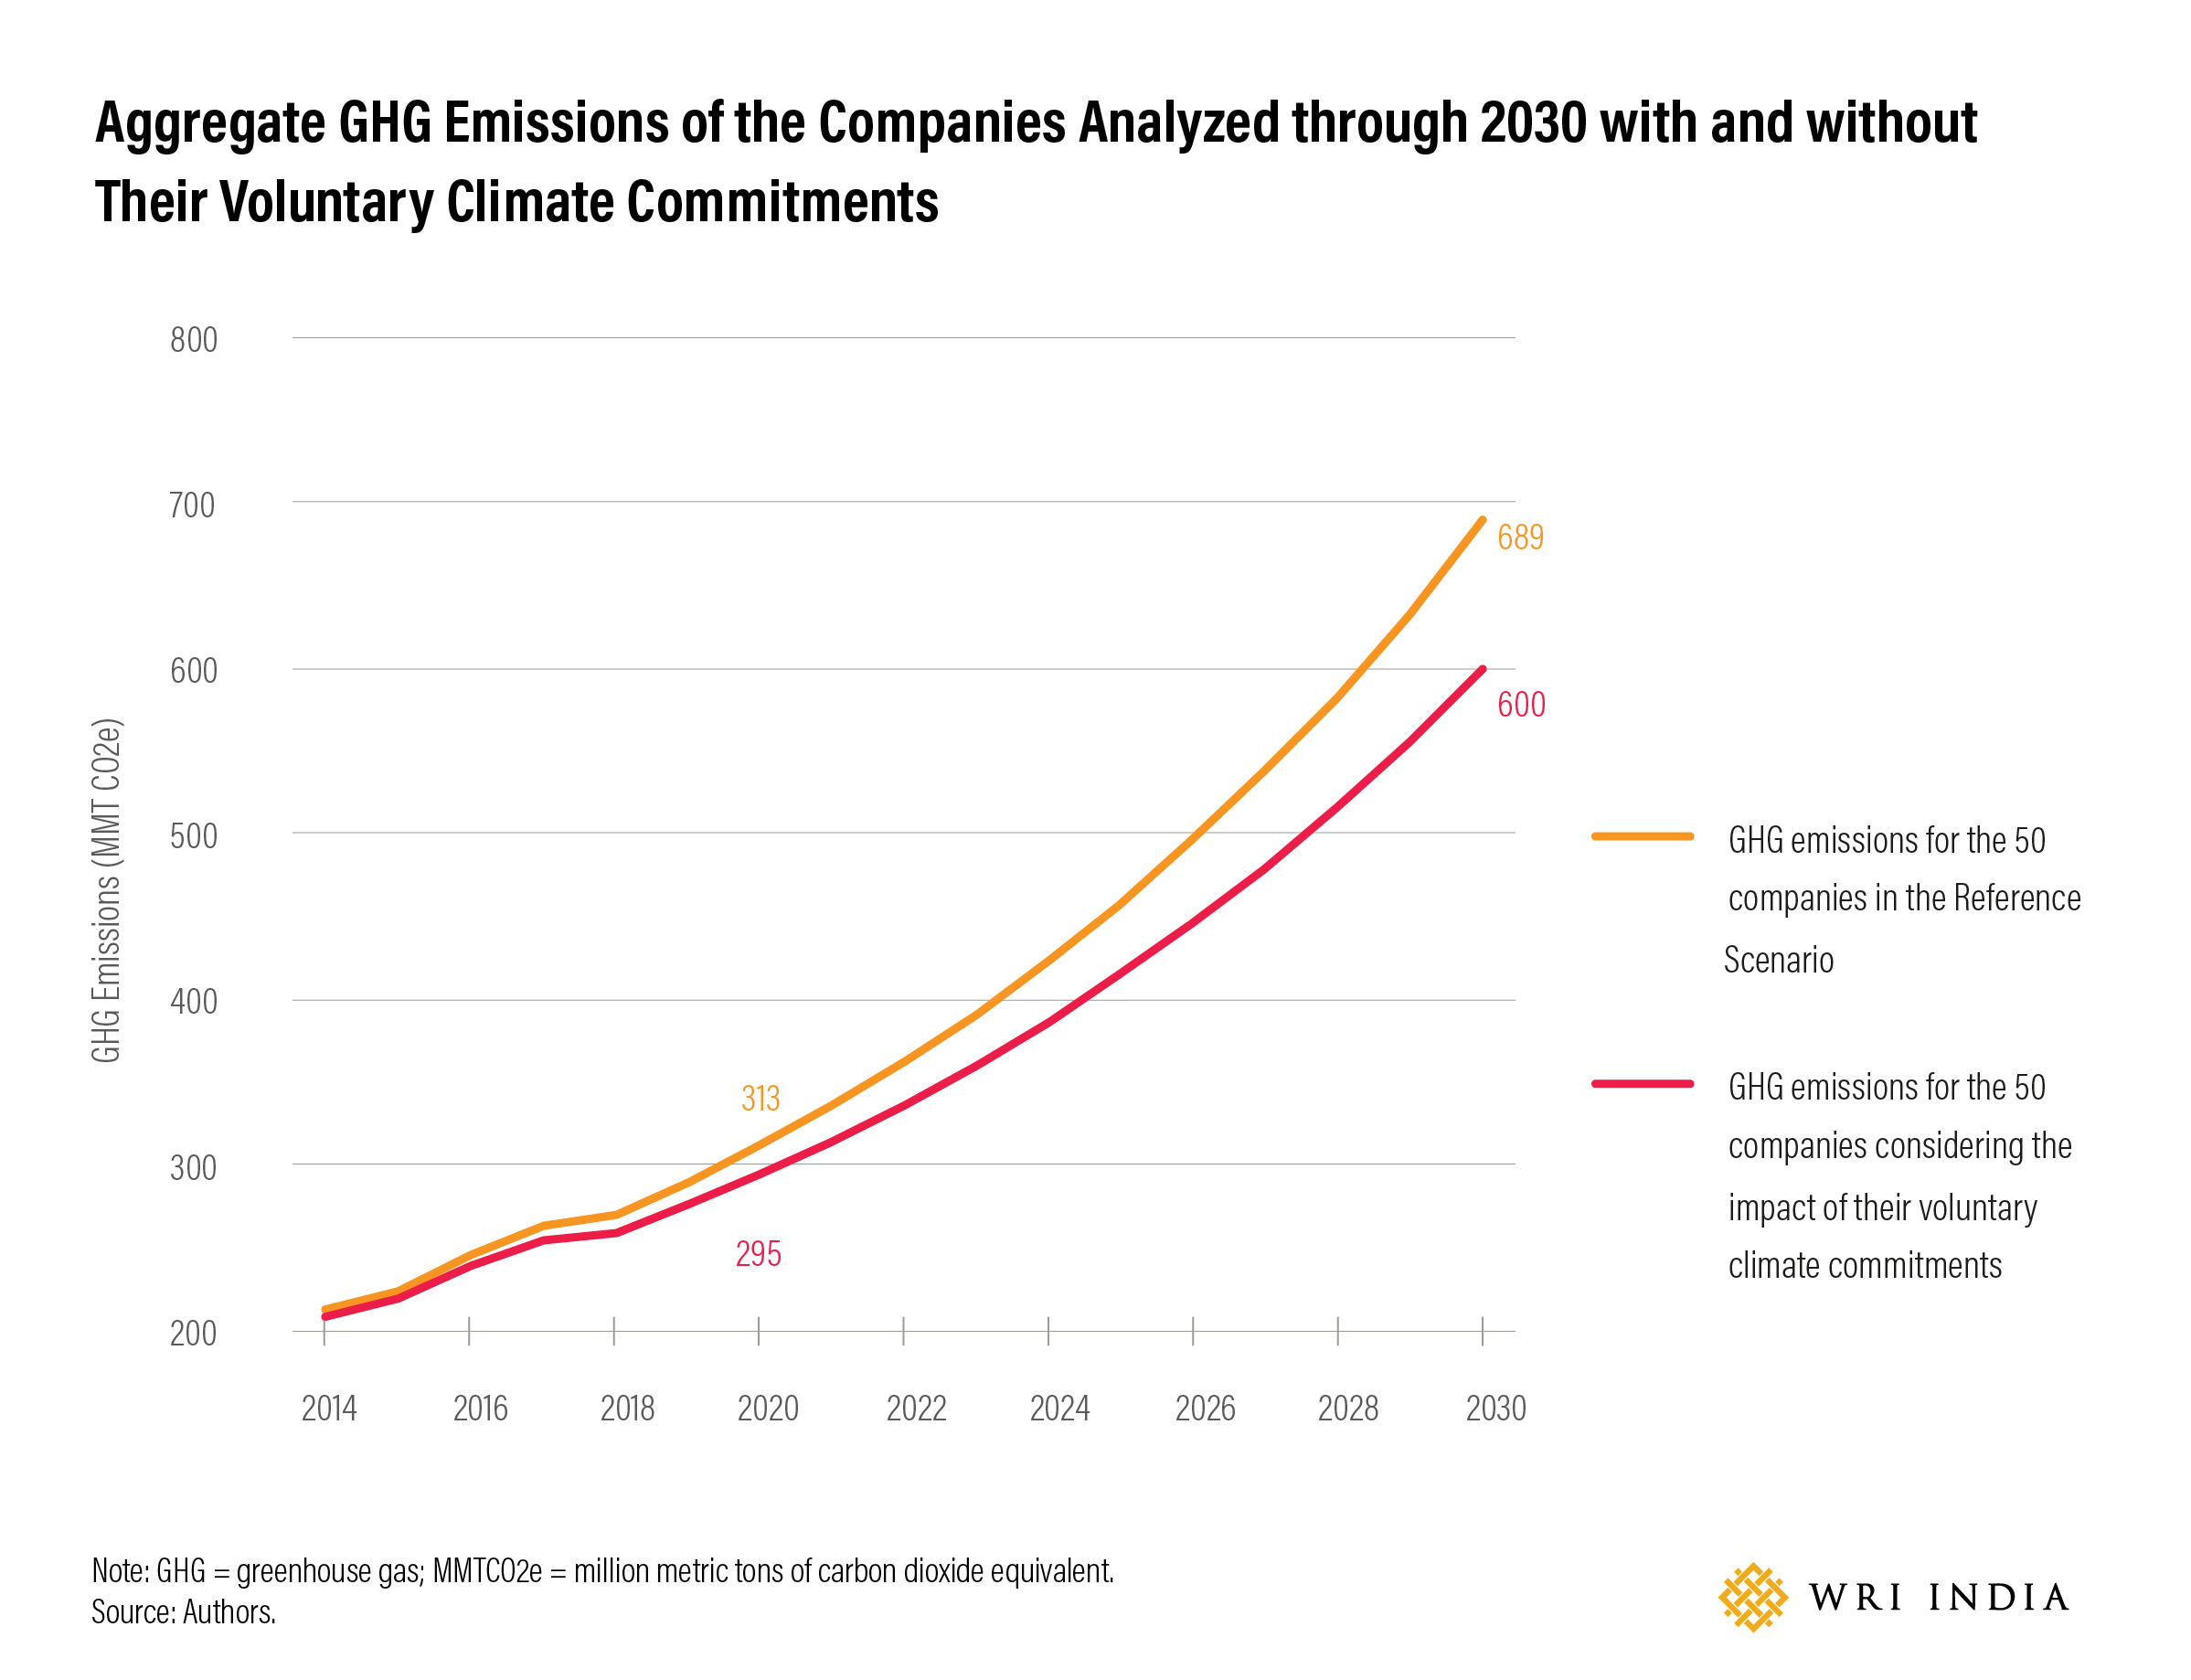 Figure 1 depicts the annual aggregate emissions for the 50 companies in the two scenarios from 2014 through 2030.